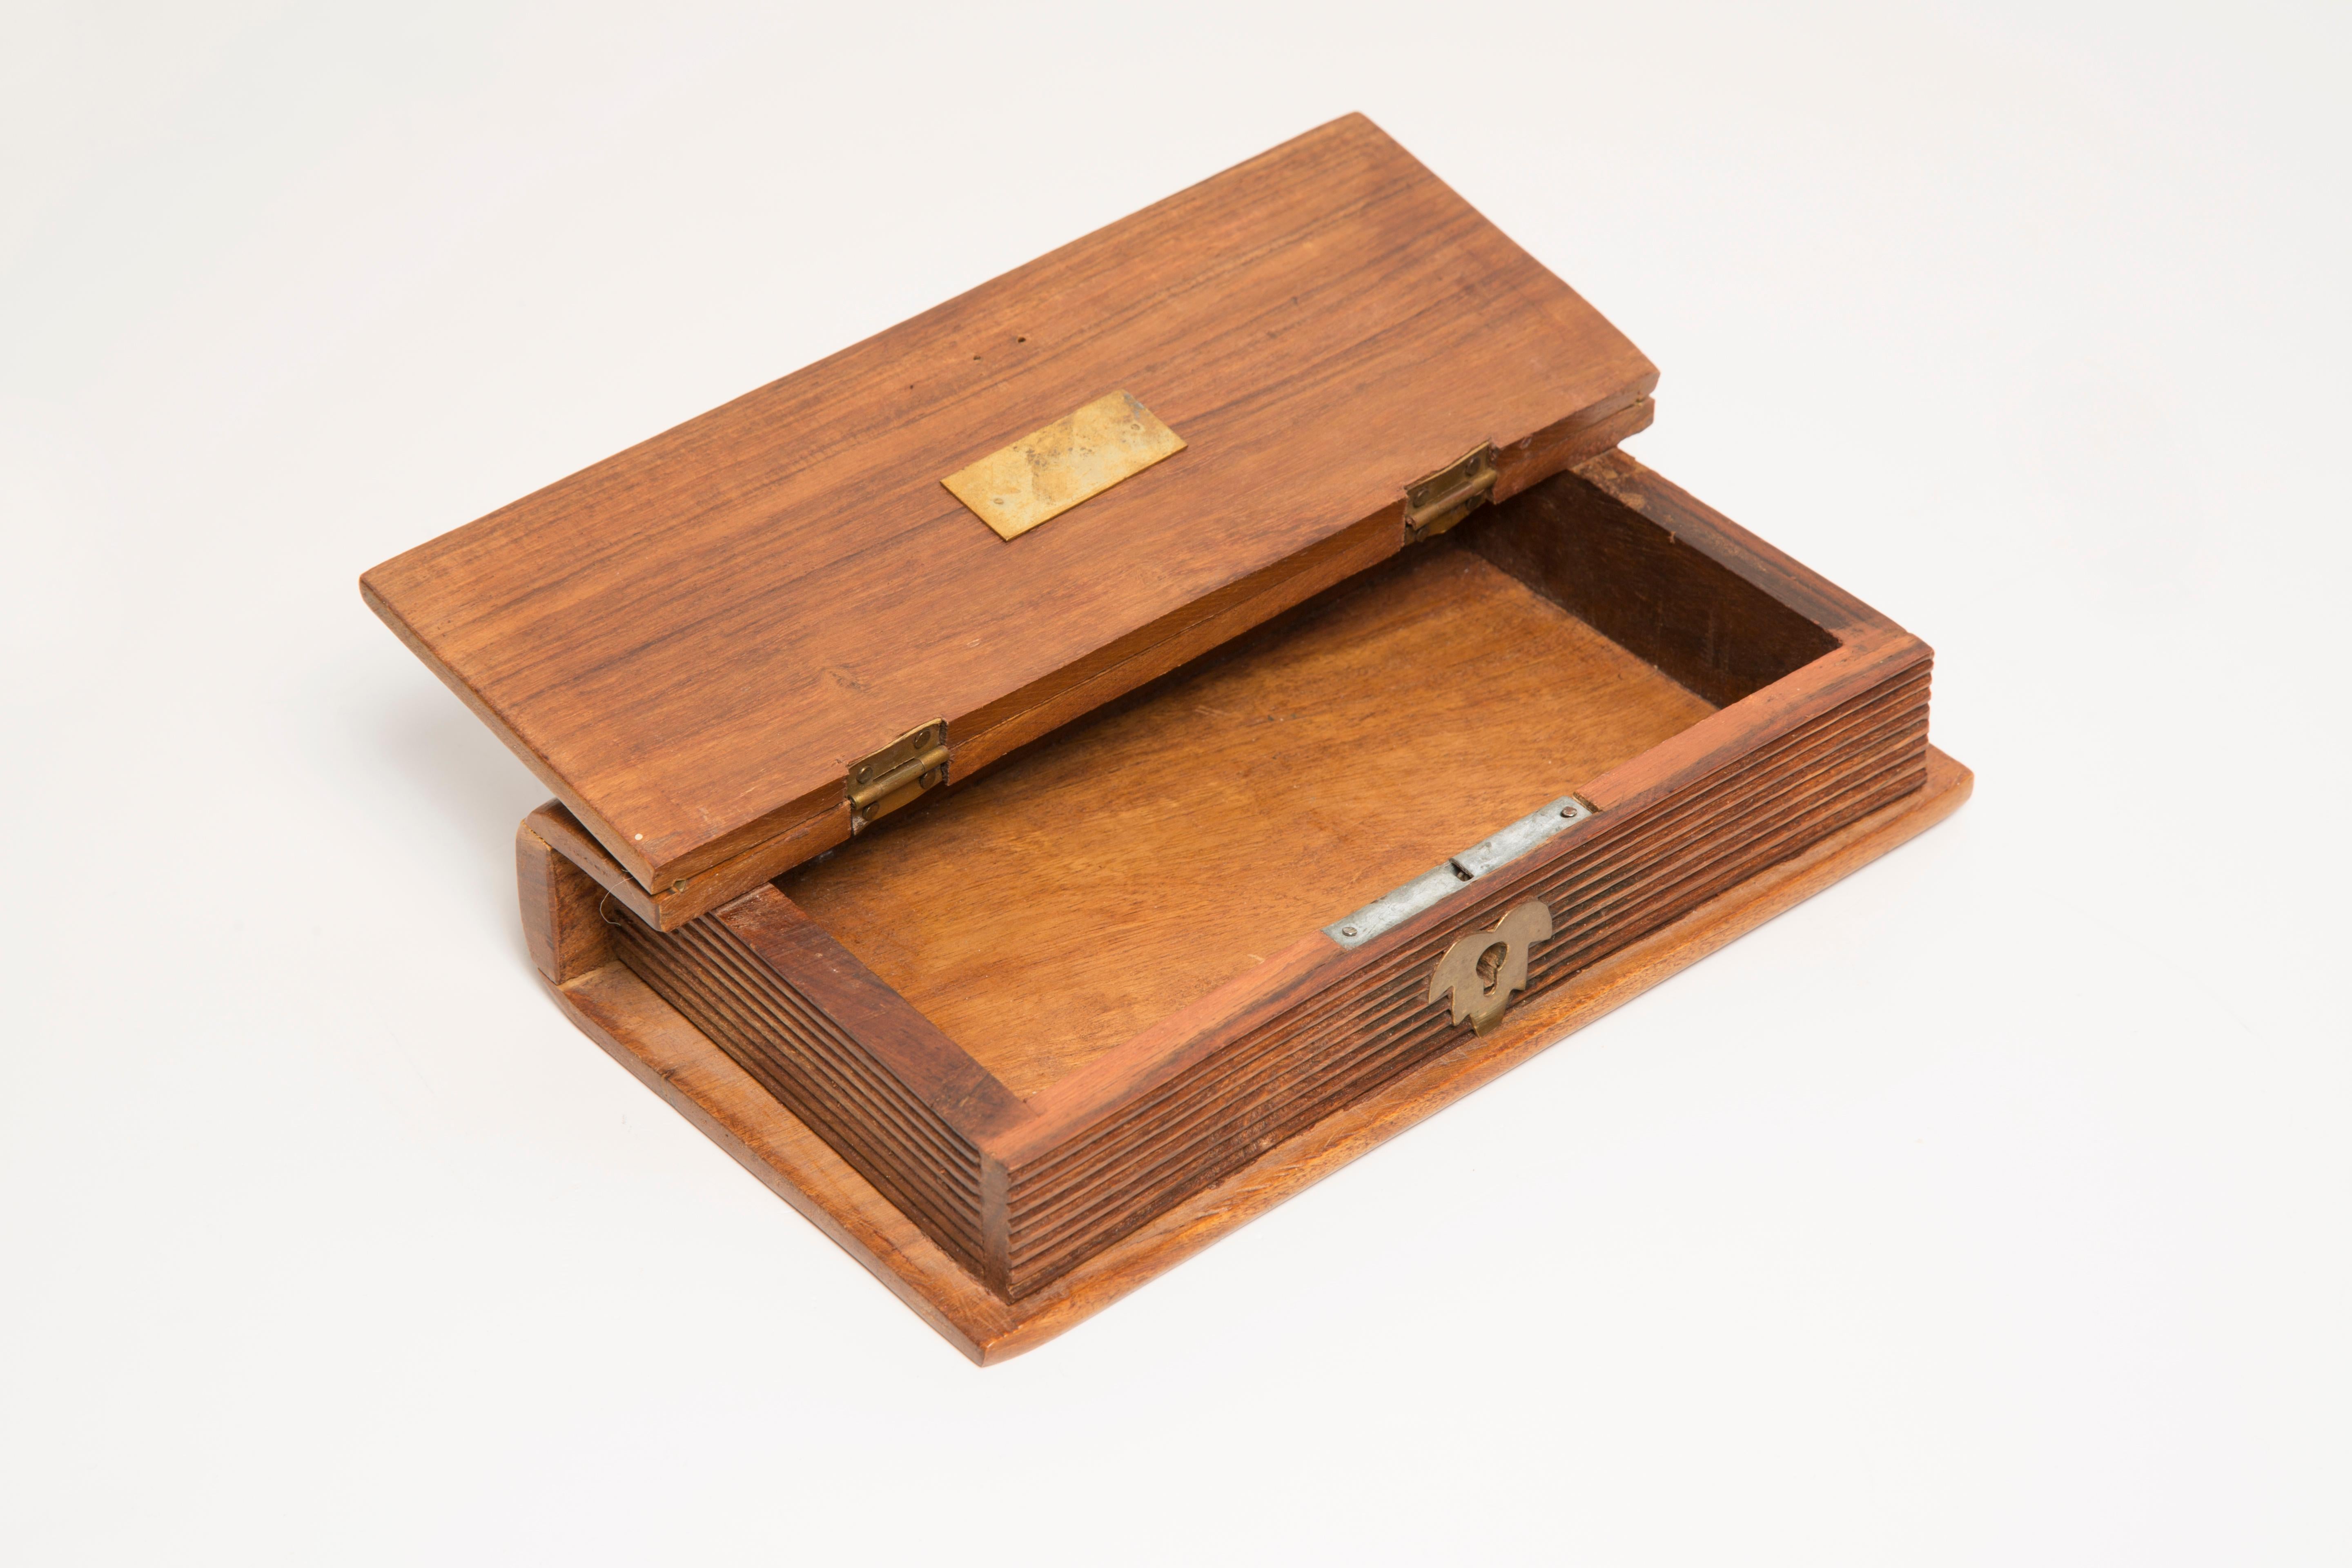 Metal Midcentury Wood Casket, Cigarette Case, or Jewelry Box, Italy, 1960s For Sale